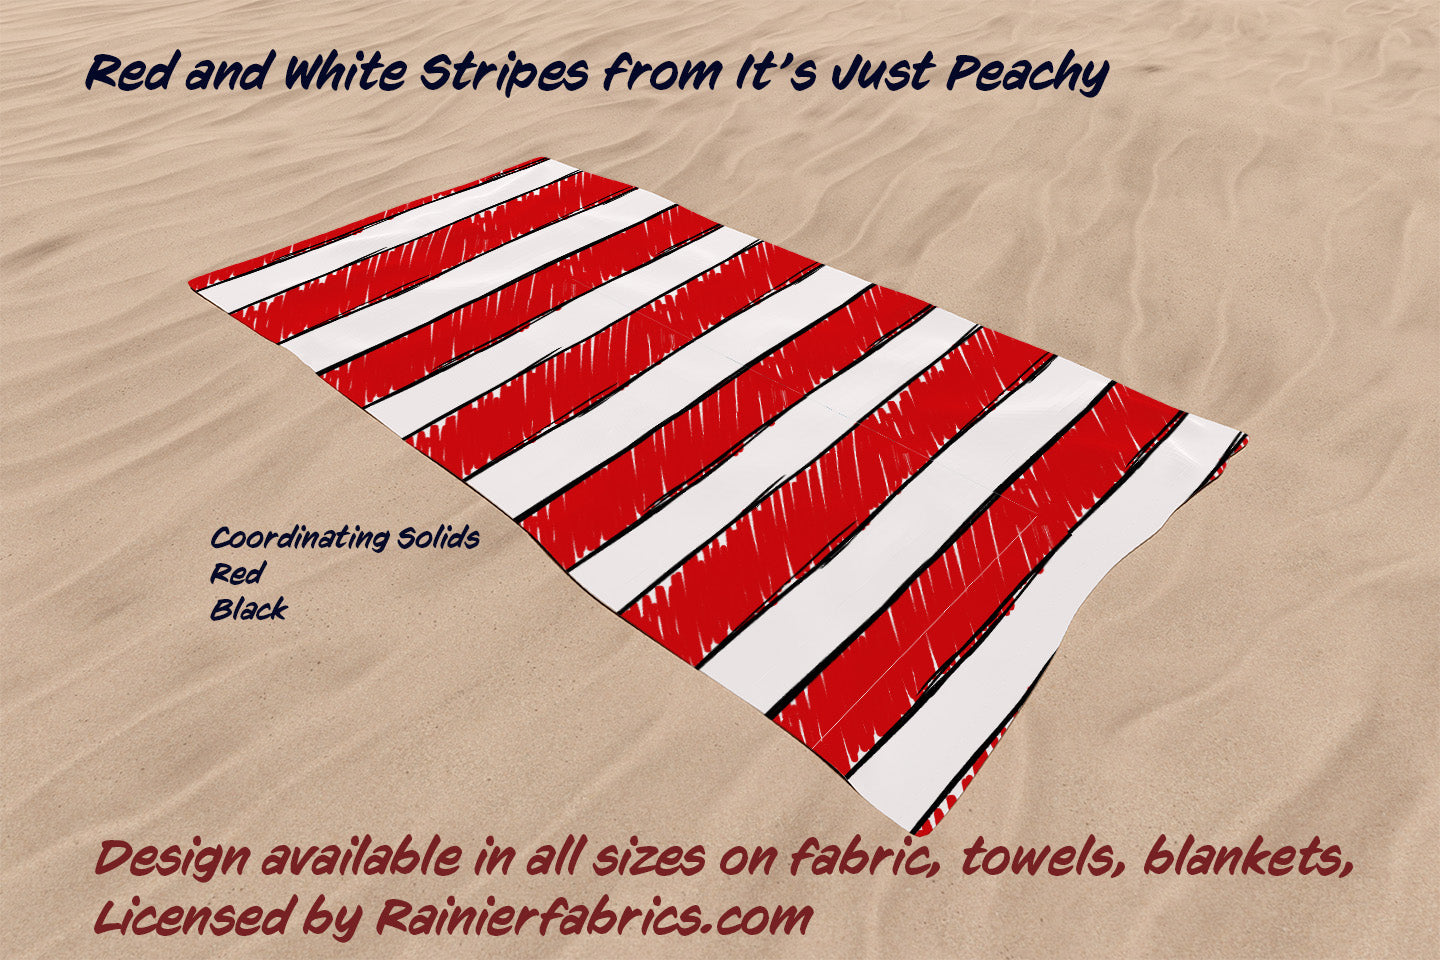 Red and White Stripes from It's Just Peachy Designs - 2-5 day turnaround - Order by 1/2 yard; Description of bases below